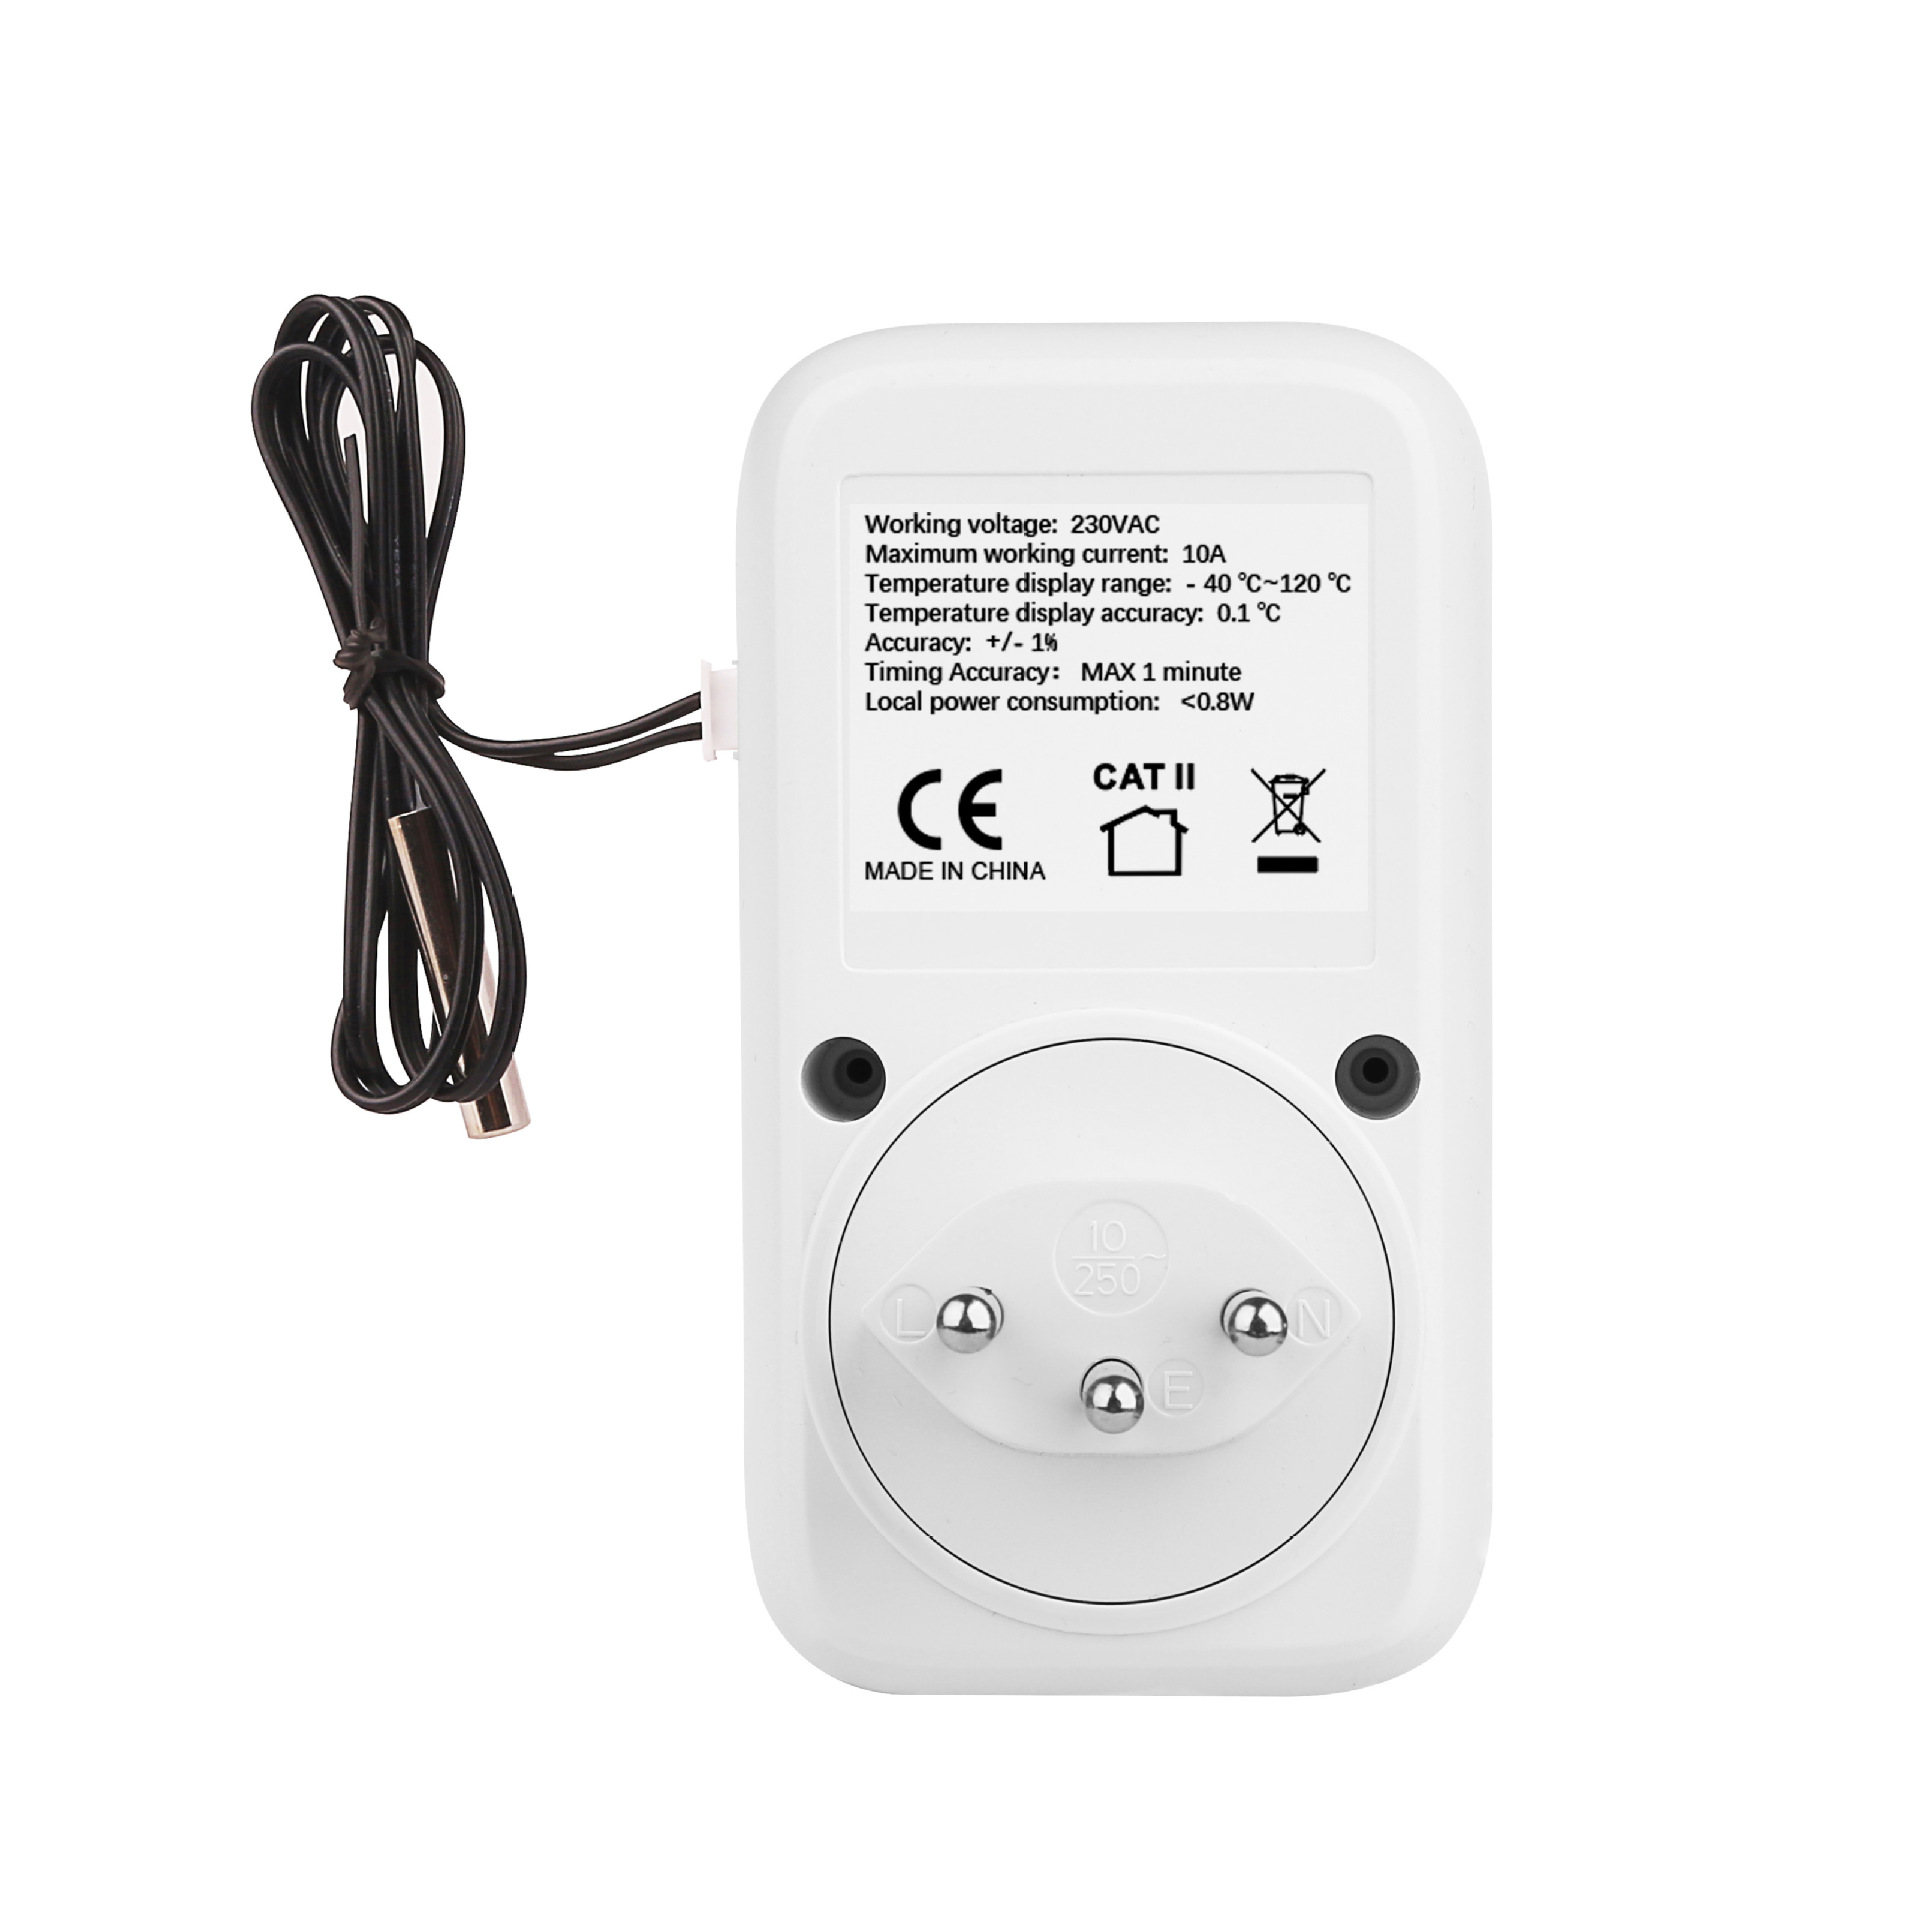 New Backlit Swiss Temperature Control Socket Countdown Thermal Switch Controller Fish Tank Pet Heating Thermostat